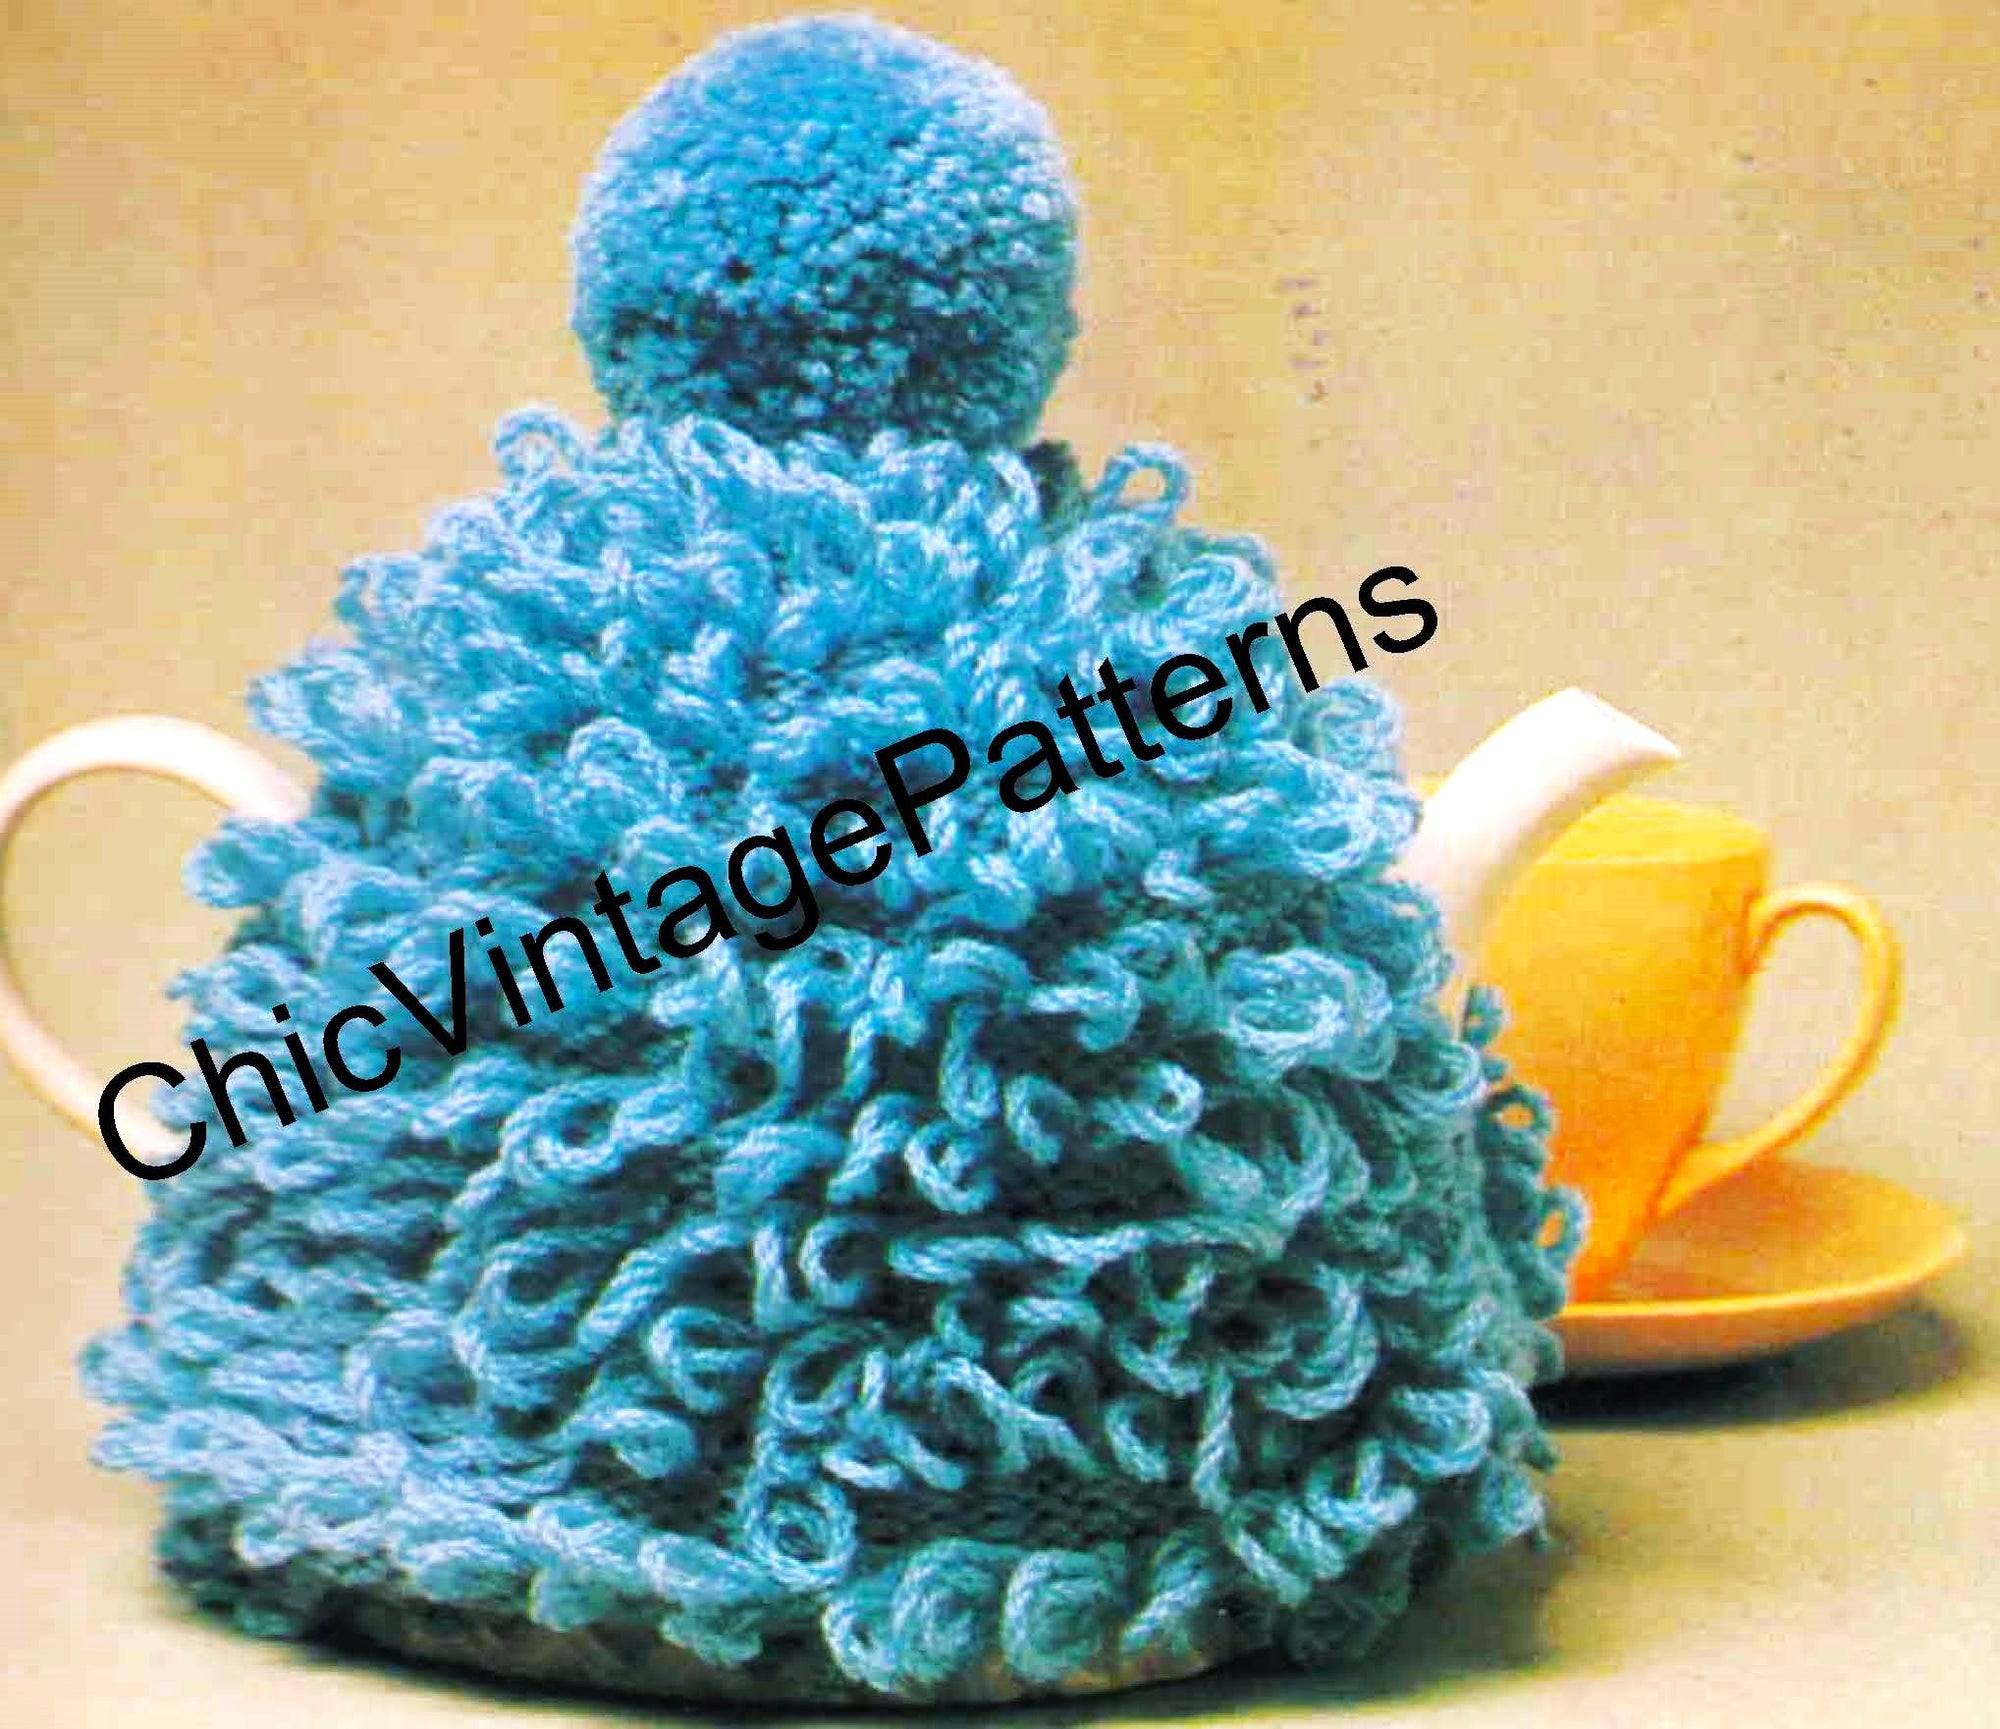 Vintage Tea Cosy Pattern, Loopy Knitted Cosy, Fits a 4 Cup Teapot, Instant Download